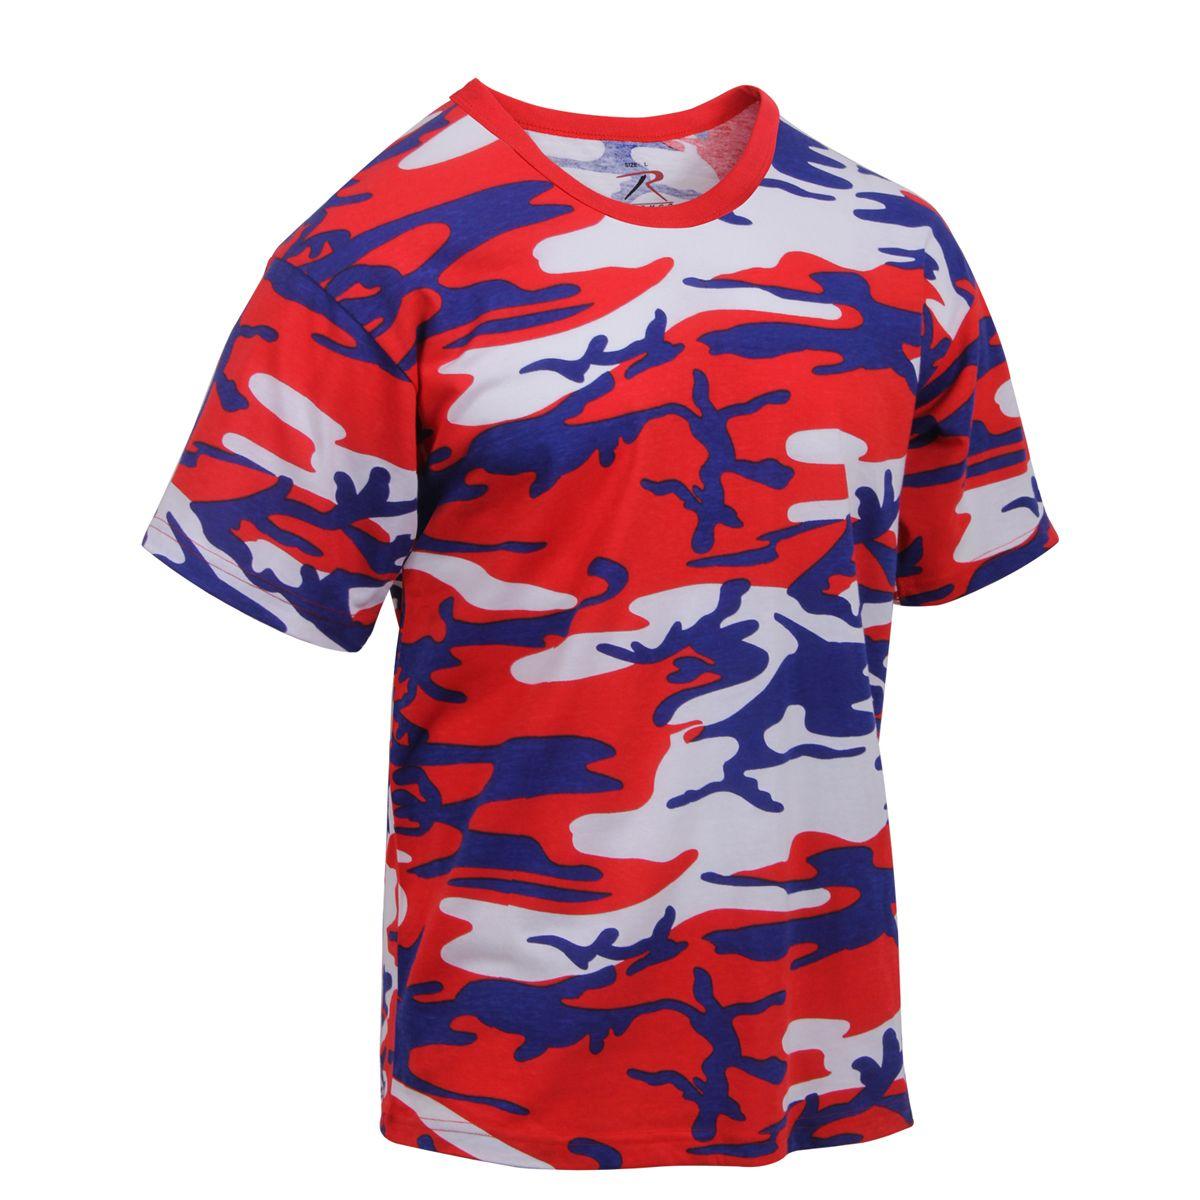 Red White and Blue Clothing Logo - Shop Red White Blue Camo T Shirts - Fatigues Army Navy